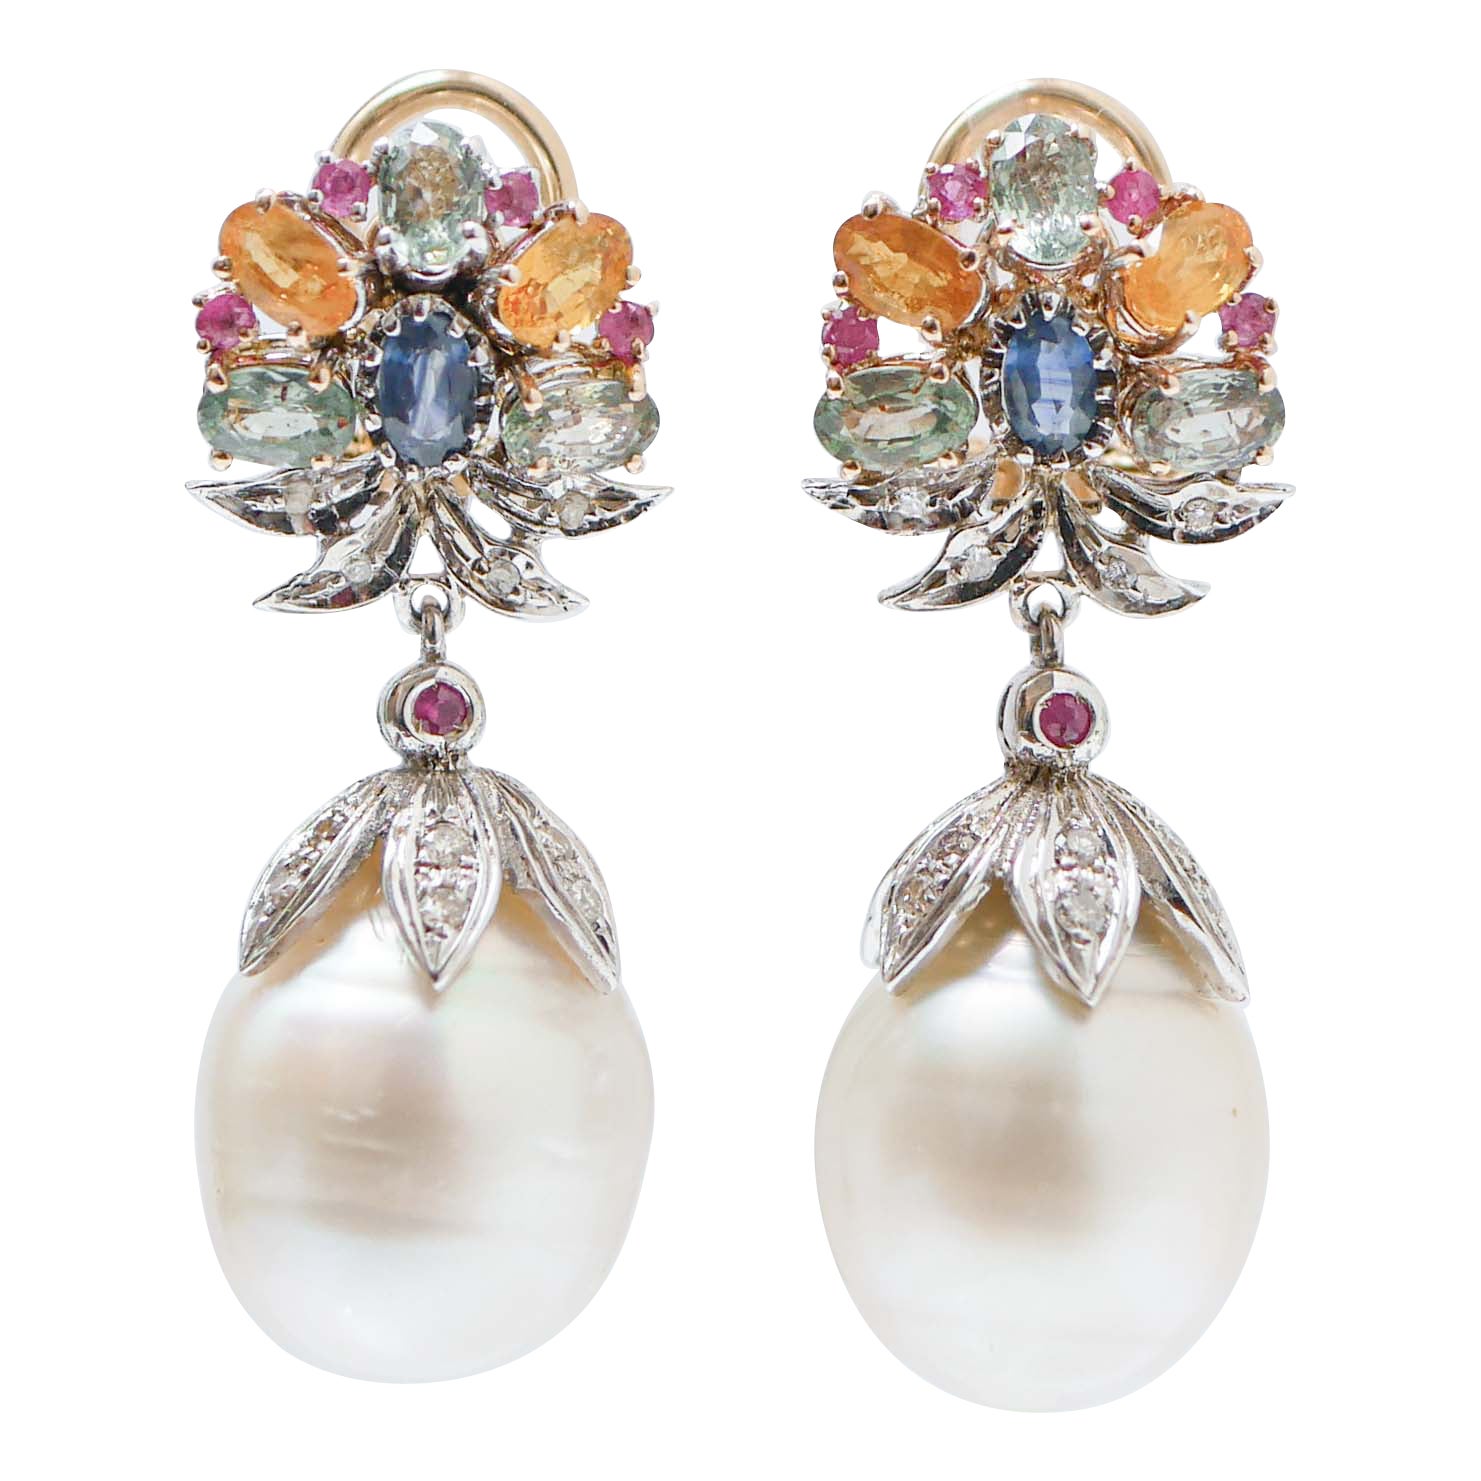 Multicolor Sapphires, Rubies, Diamonds, Pearls, 14Kt Rose and White Gold Earring